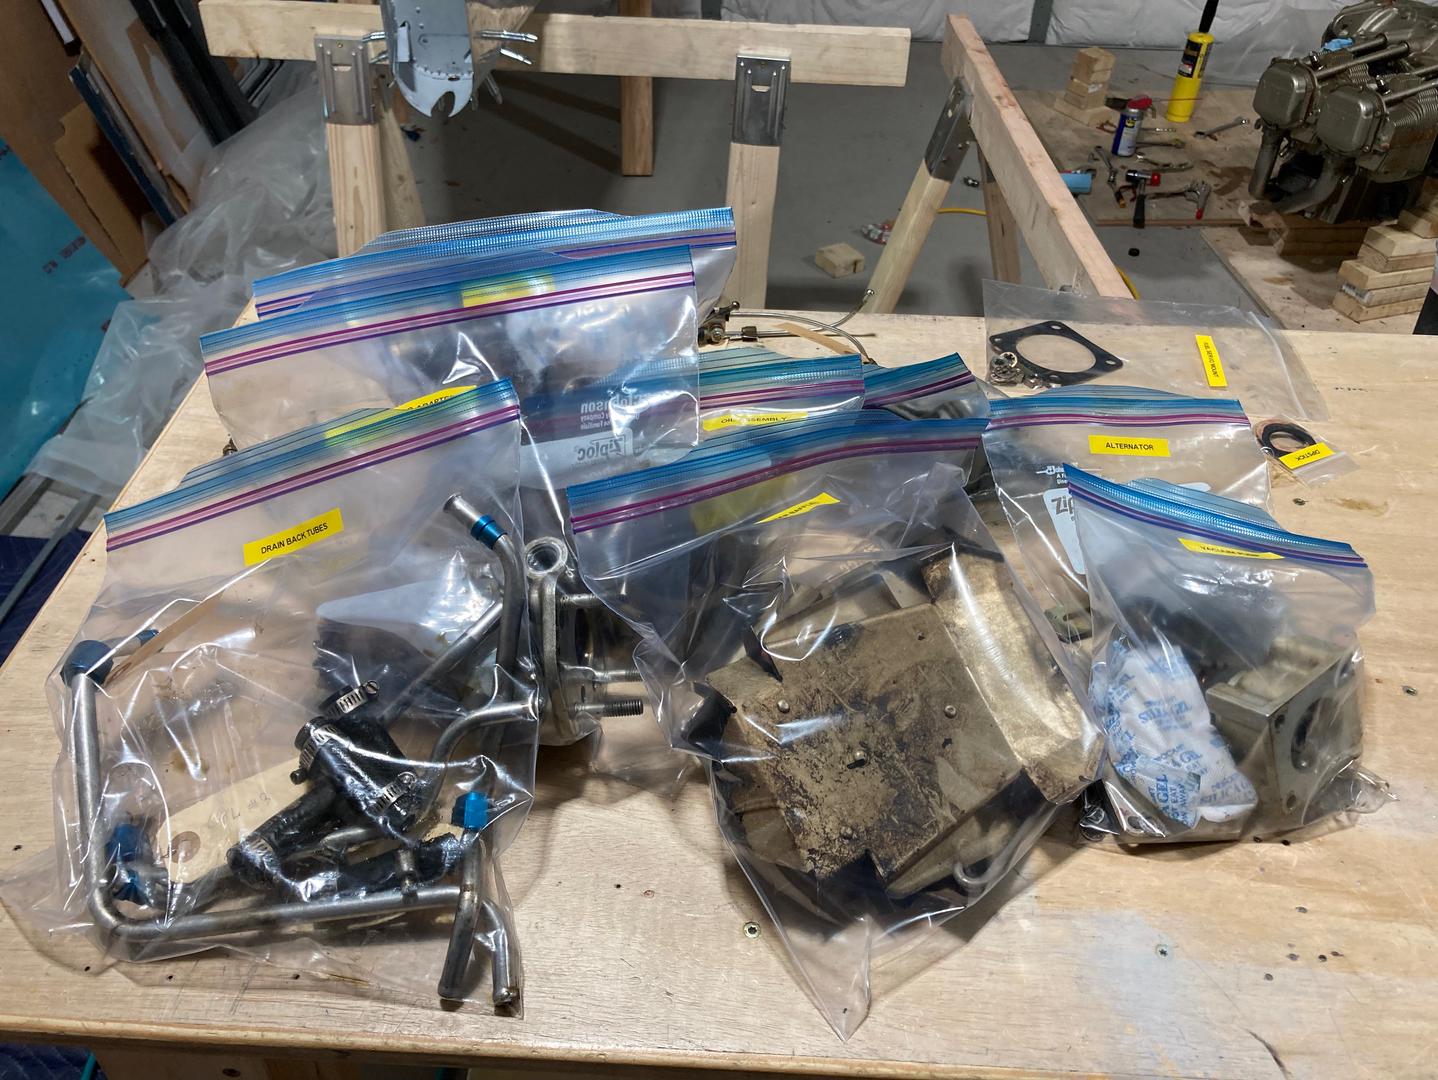 The parts bags.